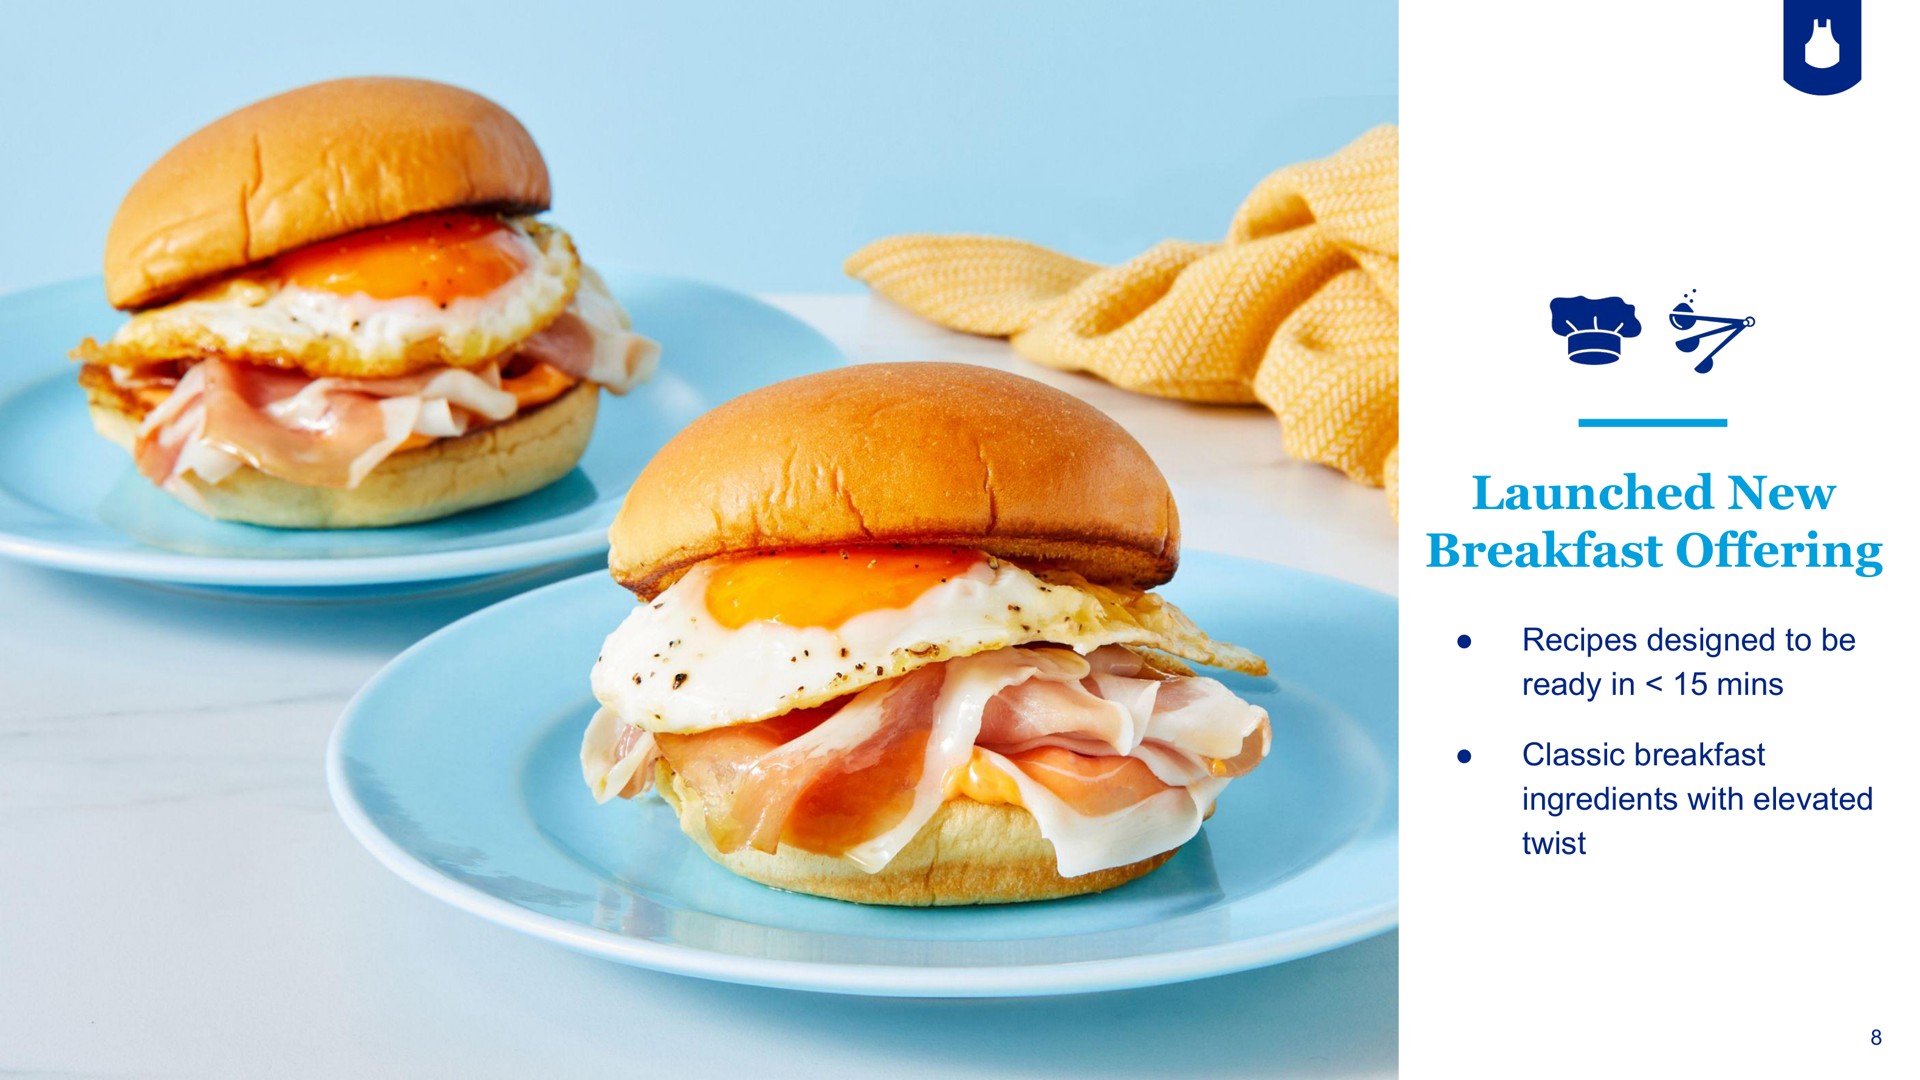 launched new breakfast offering | Blue Apron